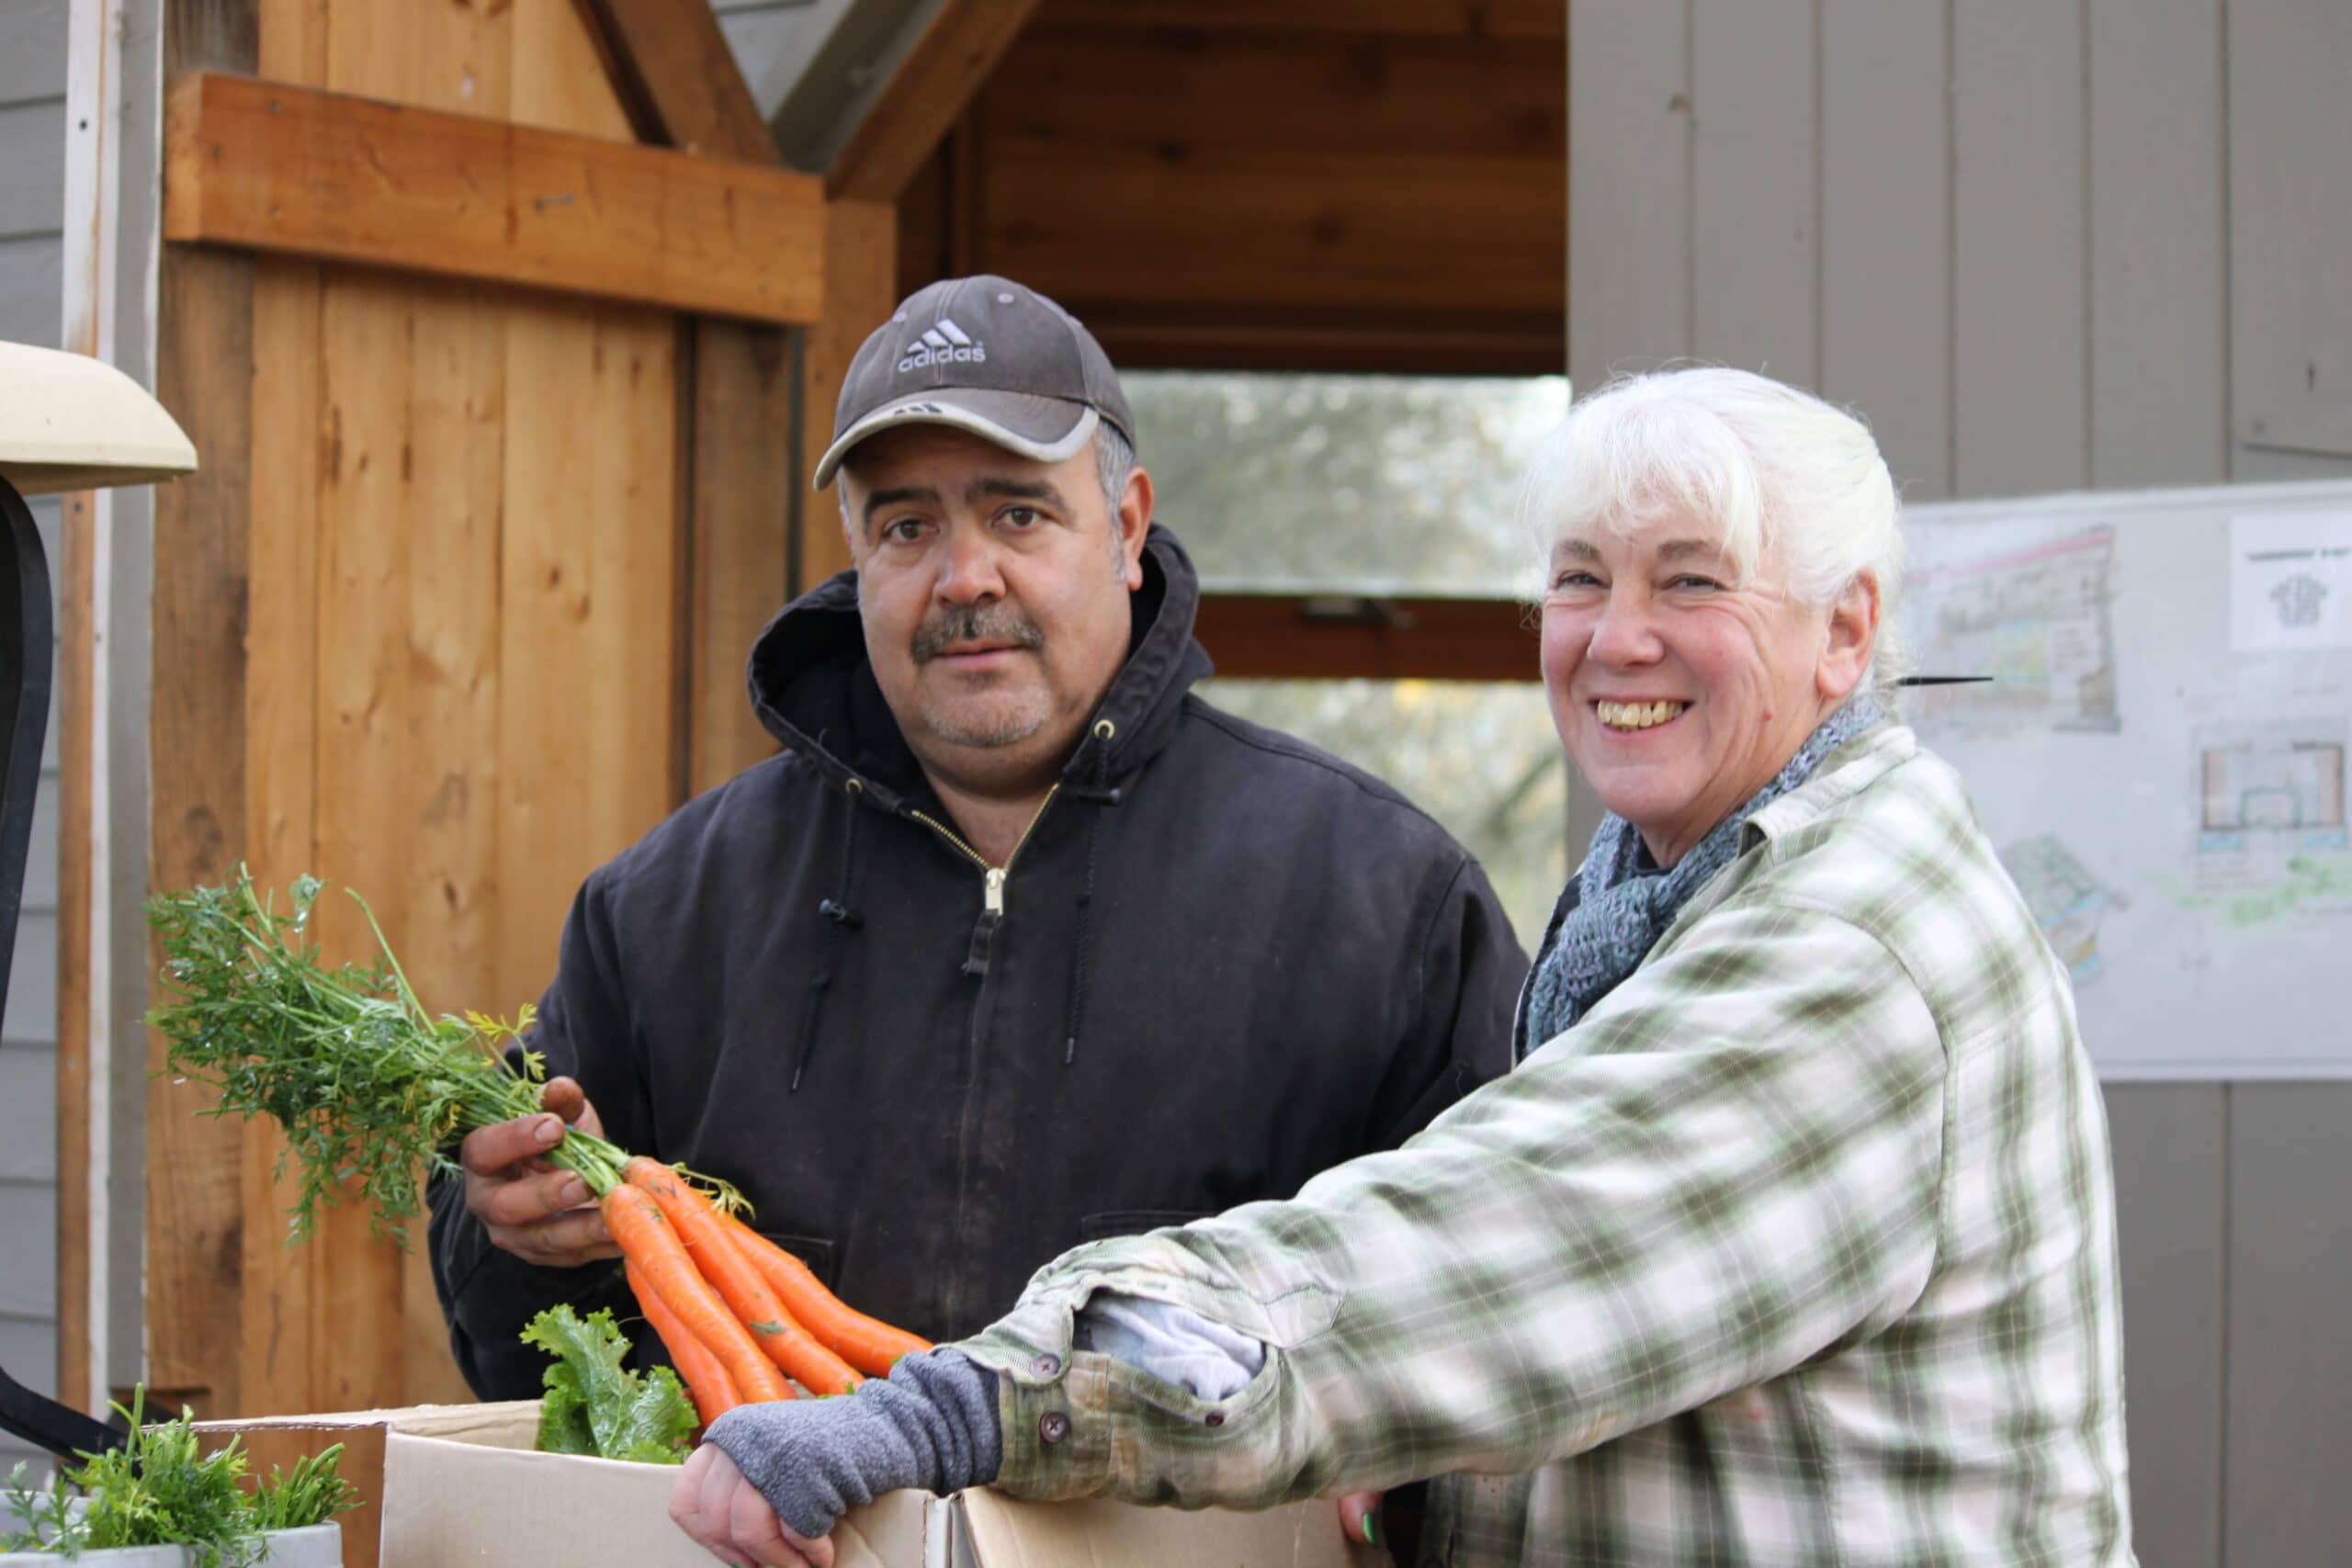 Mary and Pepe, 21 Acres' farmers, filling boxes of carrots in the fall destined for Seattle-area restaurants